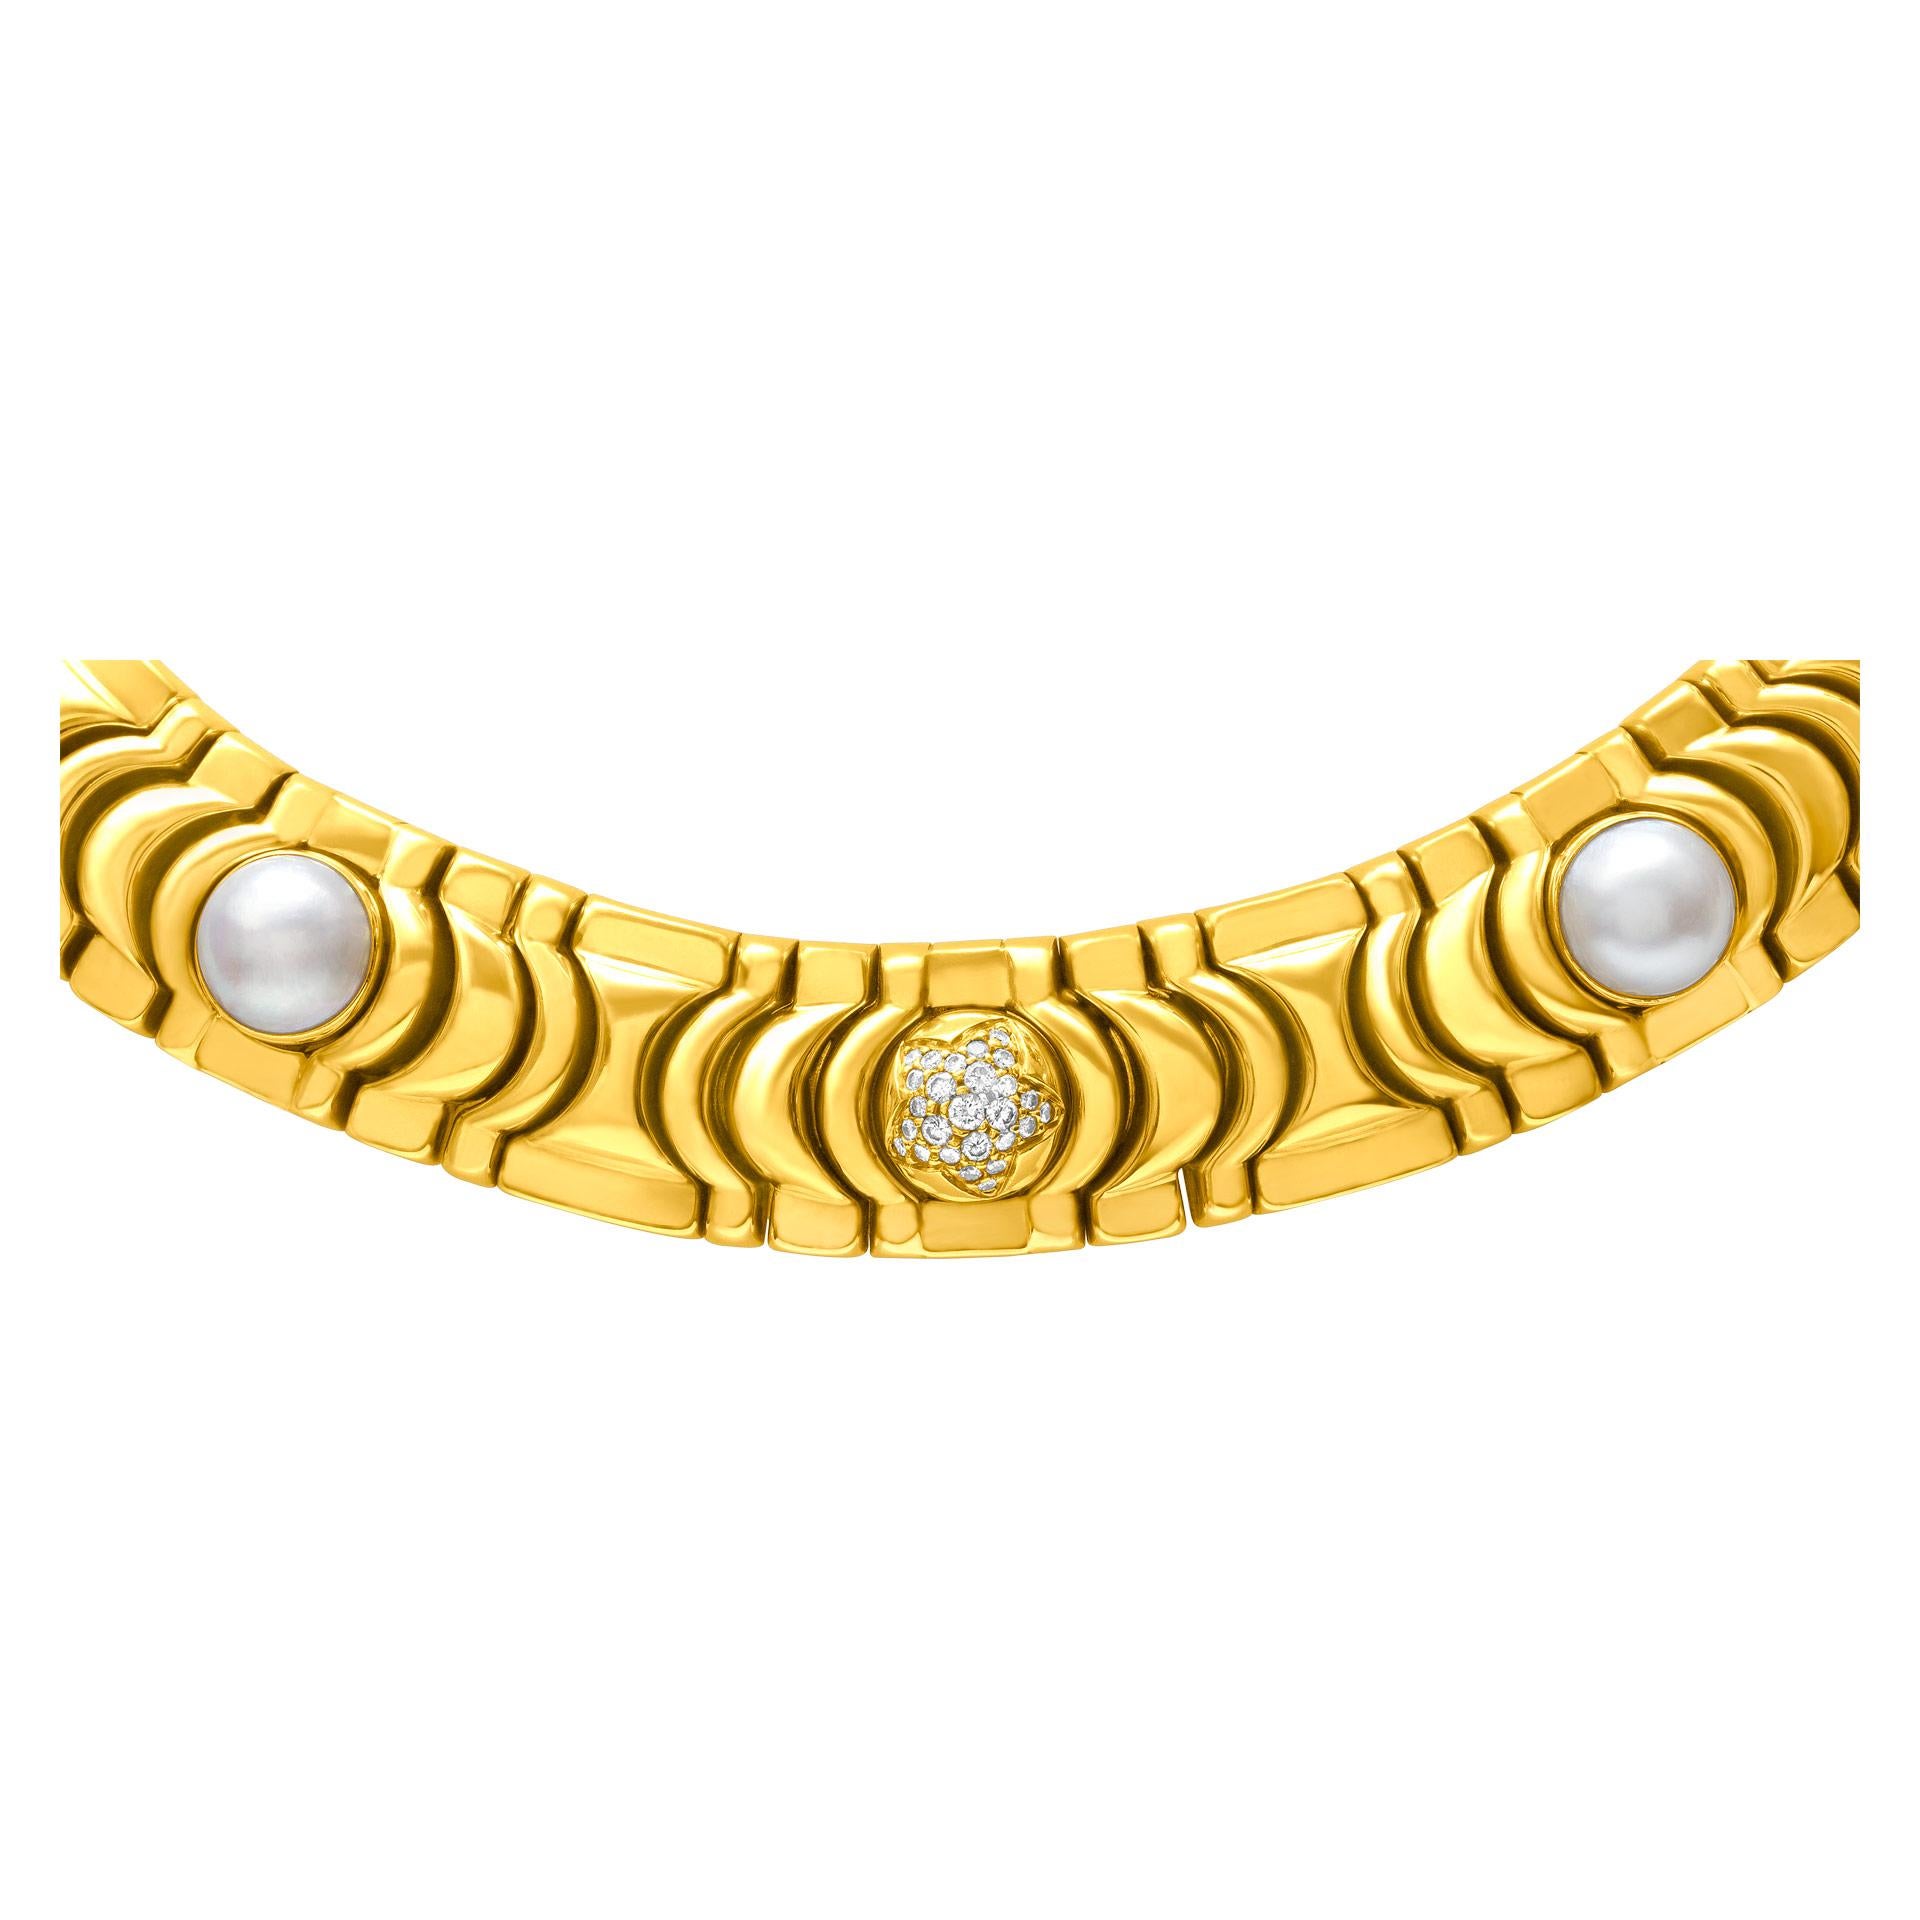 ESTIMATED RETAIL: $42,000 YOUR PRICE: $17,880 - Piaget choker necklace in 18k with pearl, gold bead & single-center pave F-G color, VVS-VS clarity diamond sections. Will fit up to 15